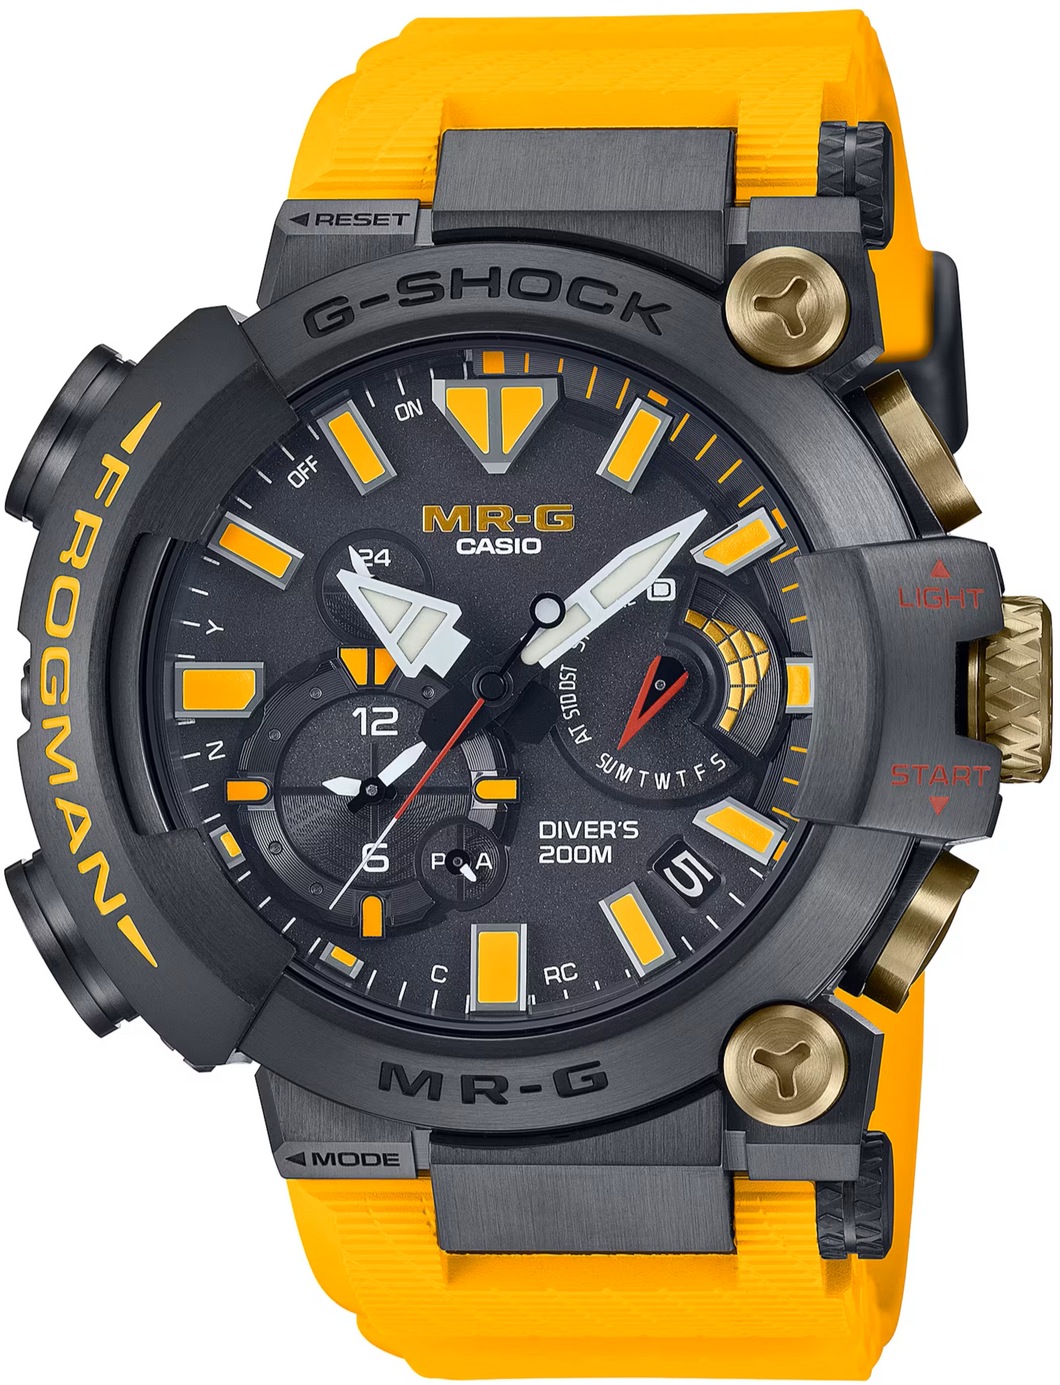 Casio G-Shock Master of G MR-G Analog Frogman ISO 200M Diver Double Anniversary MRG-BF1000R-1A9 www.watchoutz.com